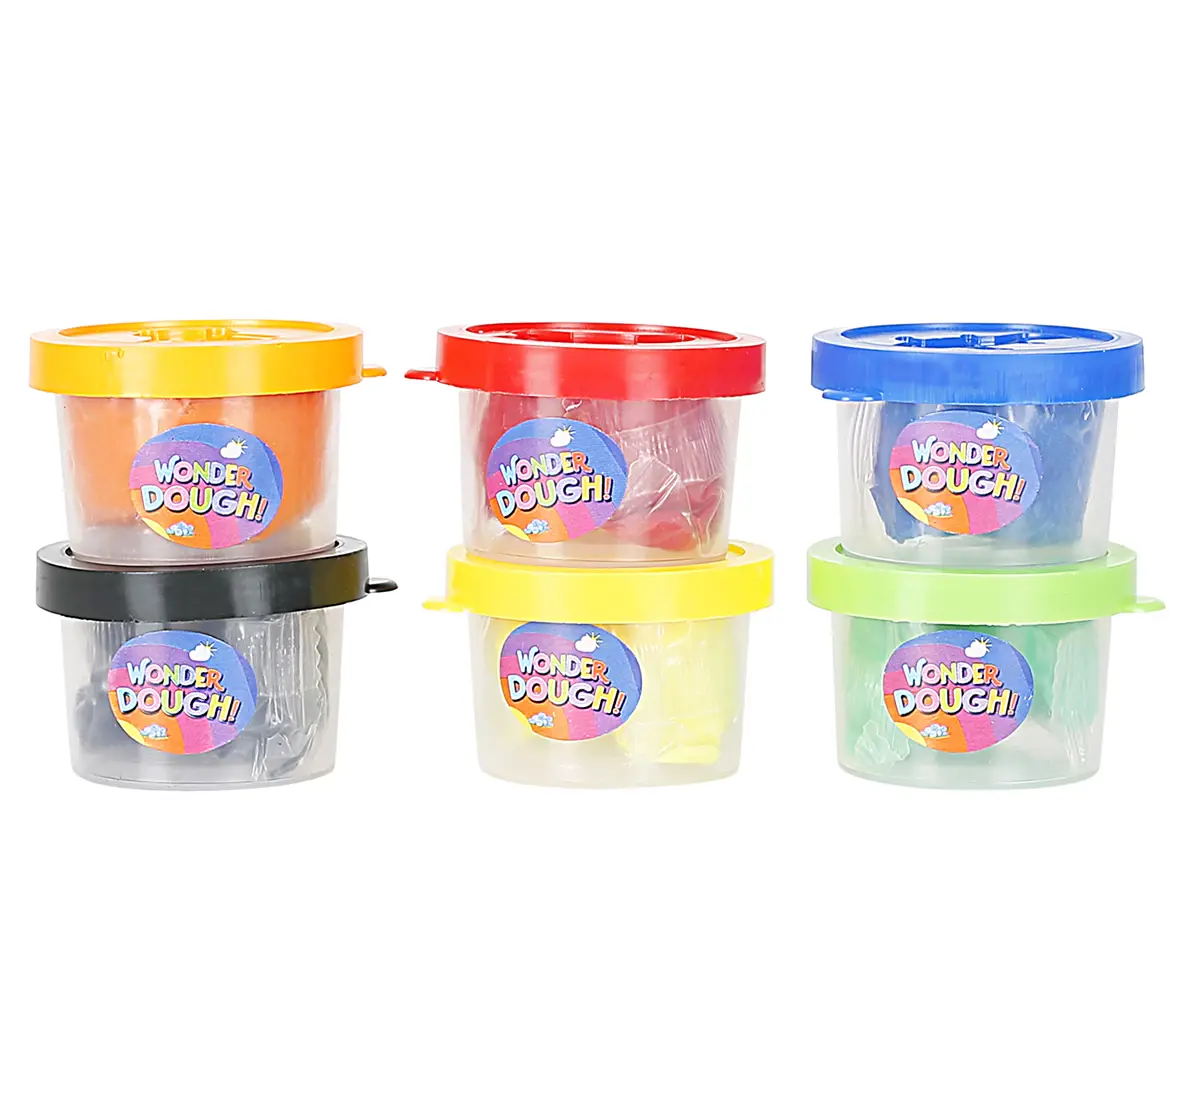 Youreka Hex Dough 6 Shades 25g Clay Toy for Kids 3Y+, Multicolour